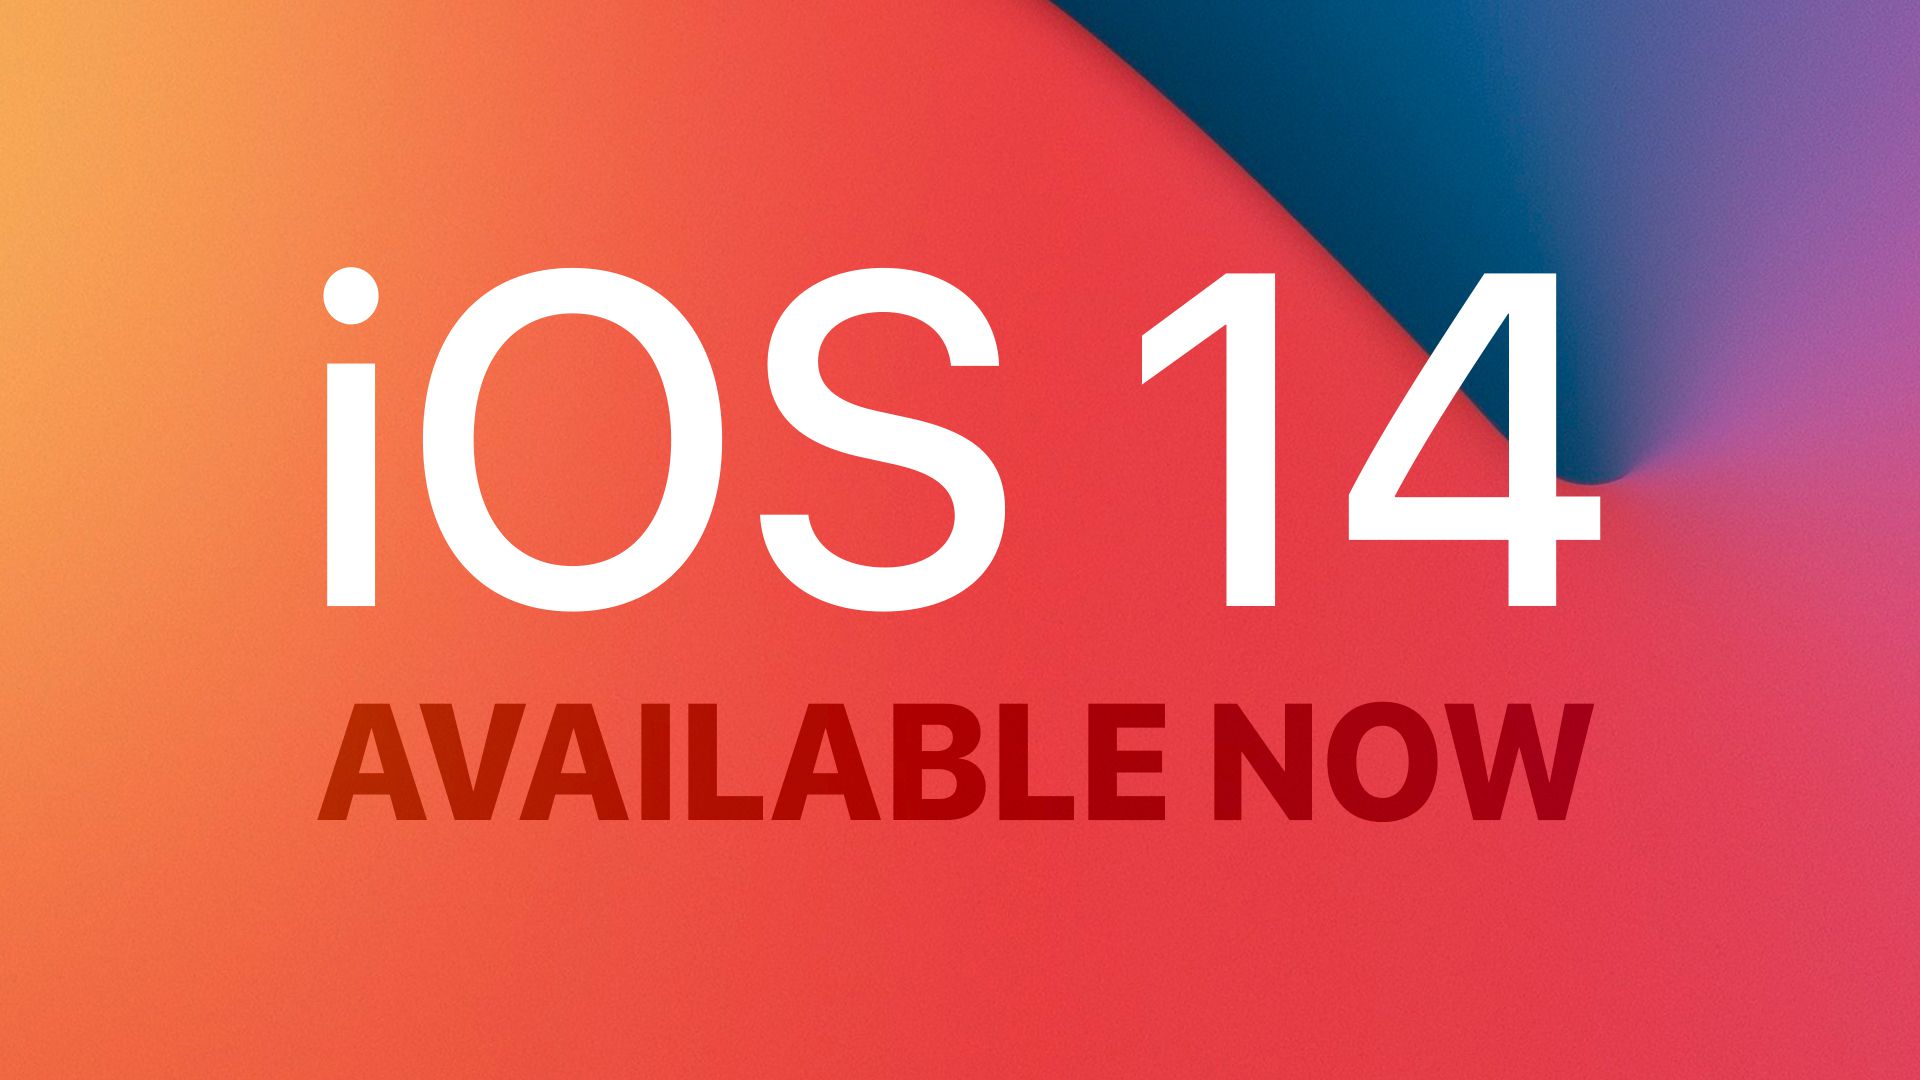 photo of Apple Releases iOS 14 and iPadOS 14 With Home Screen Redesign, App Library, Compact UI, Translate App, Scribble Support,… image